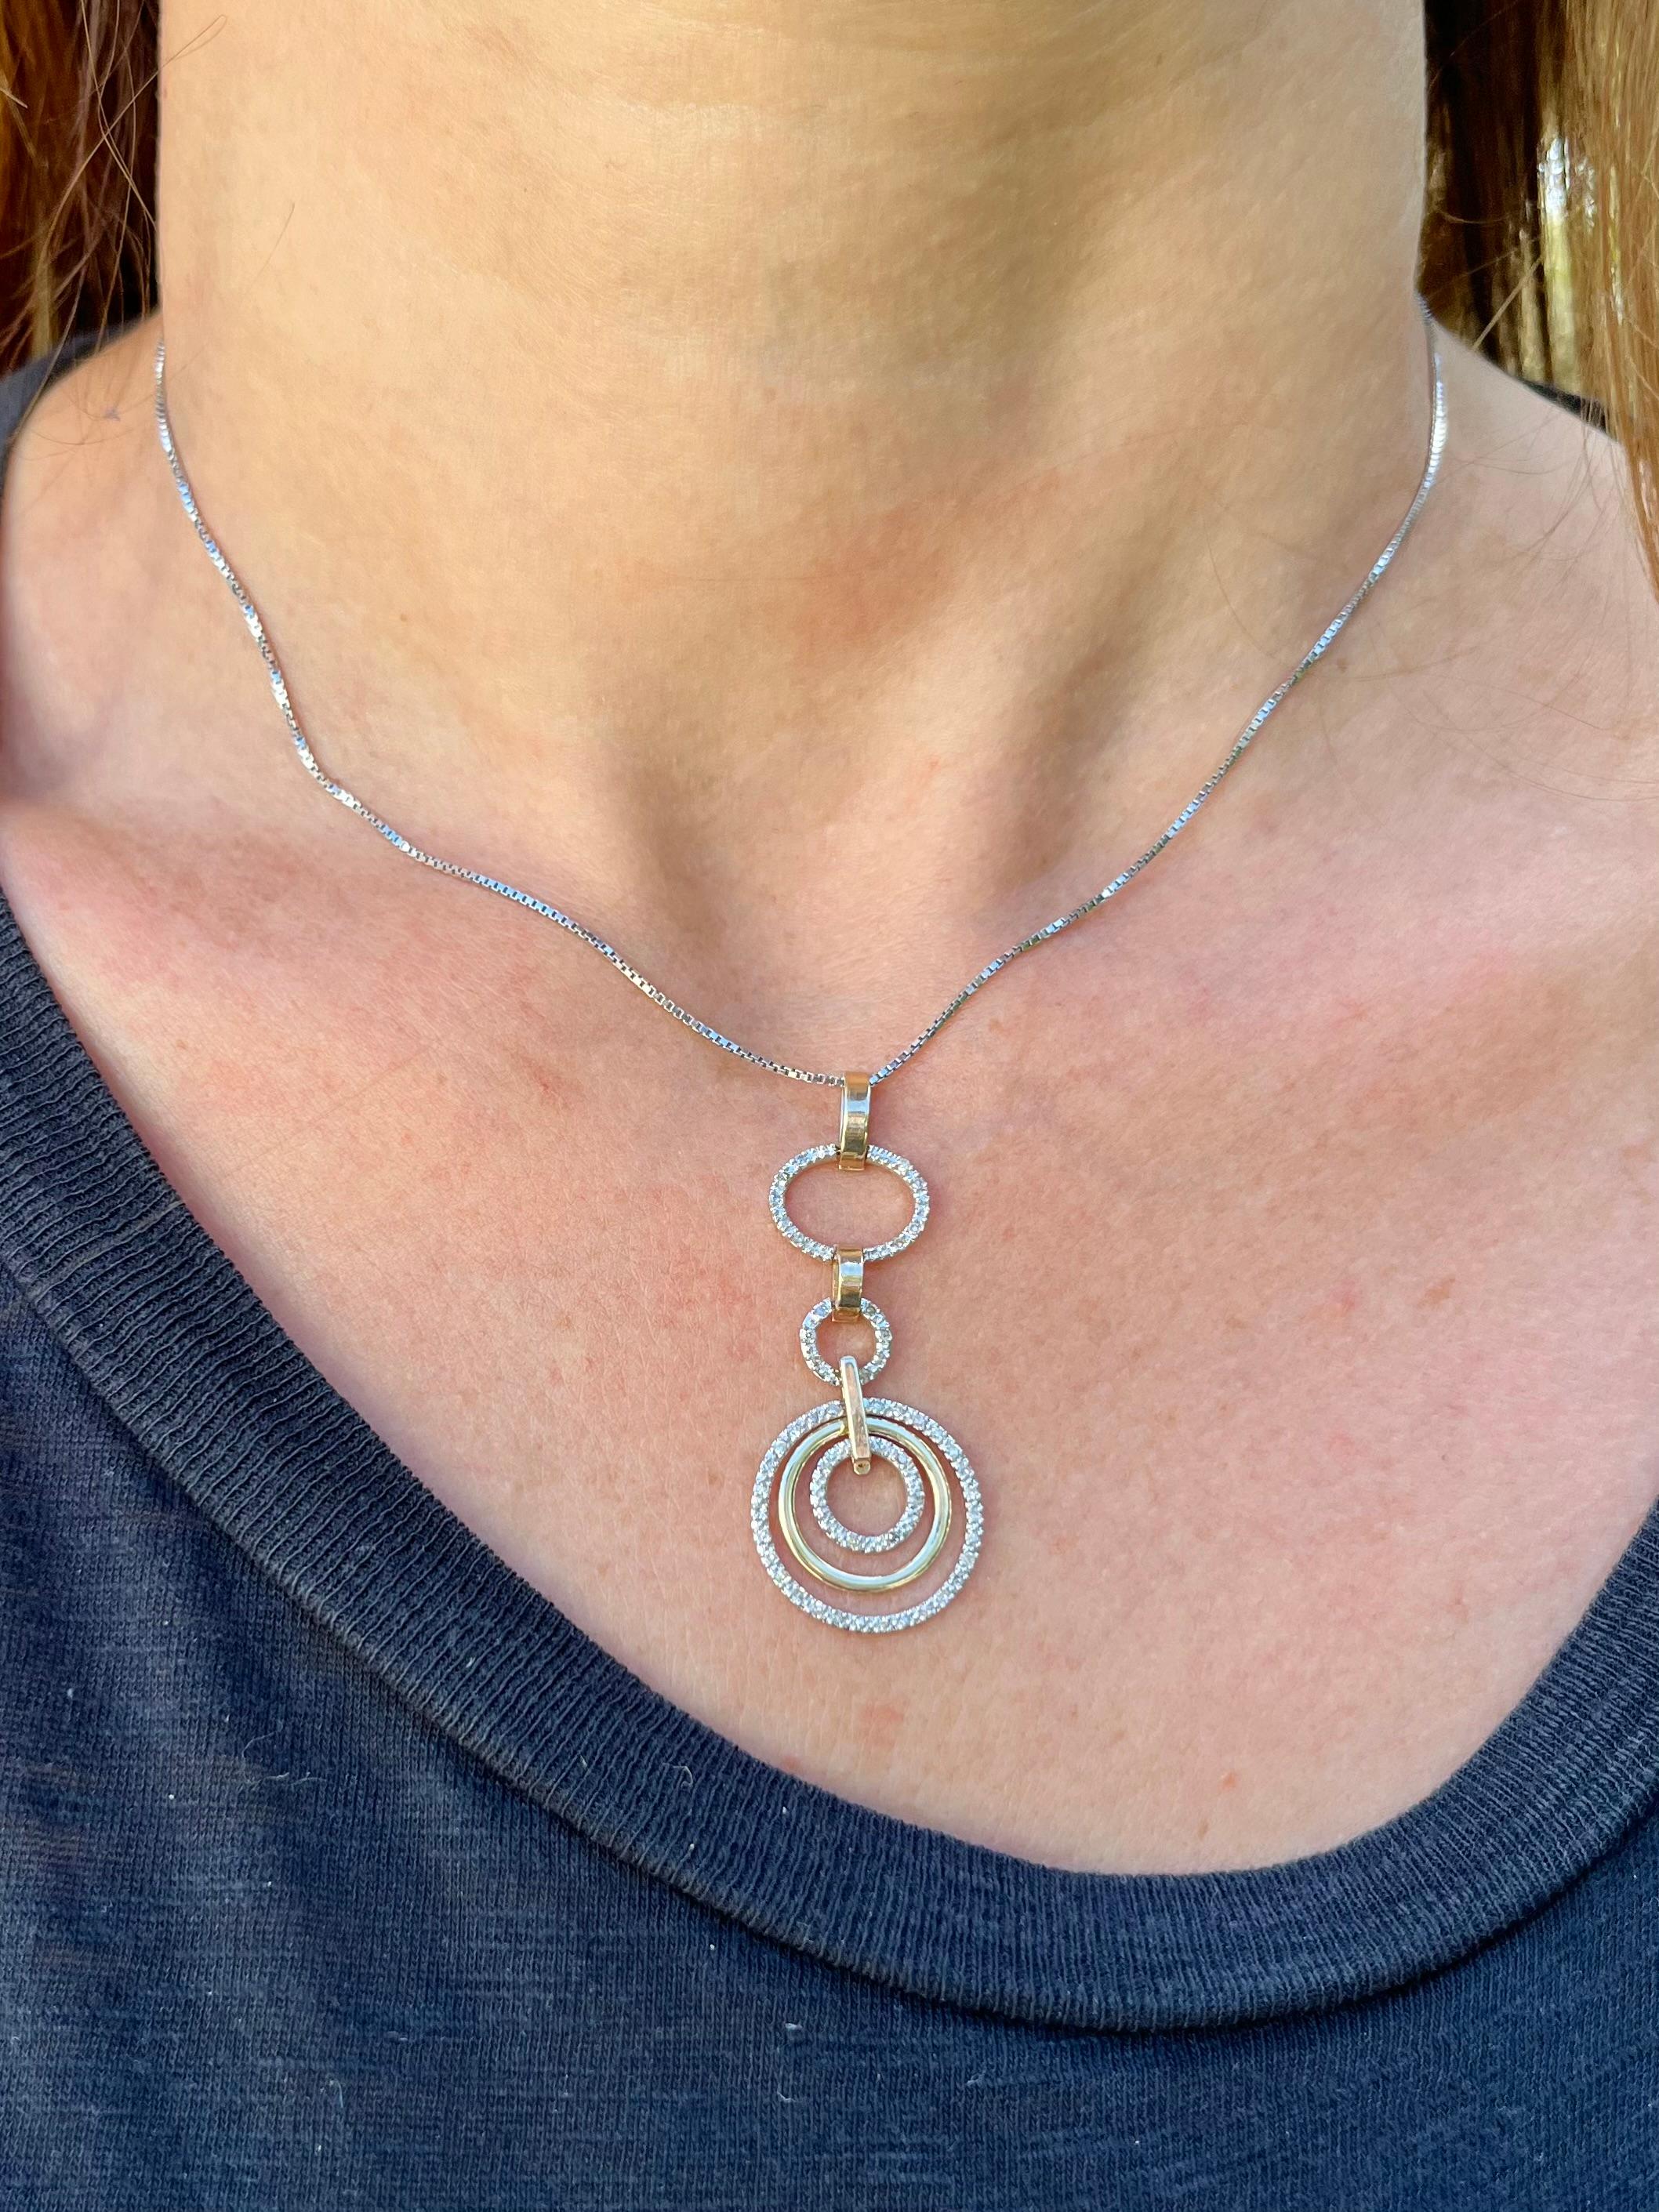 Circular multi-ring pendant necklace mounted with 1/4 carats in natural pave set diamonds and 10k solid gold. A beautiful design with a good amount of weight to ensure it stays put on the middle chest. 

An excellent and affordable gift that's ideal